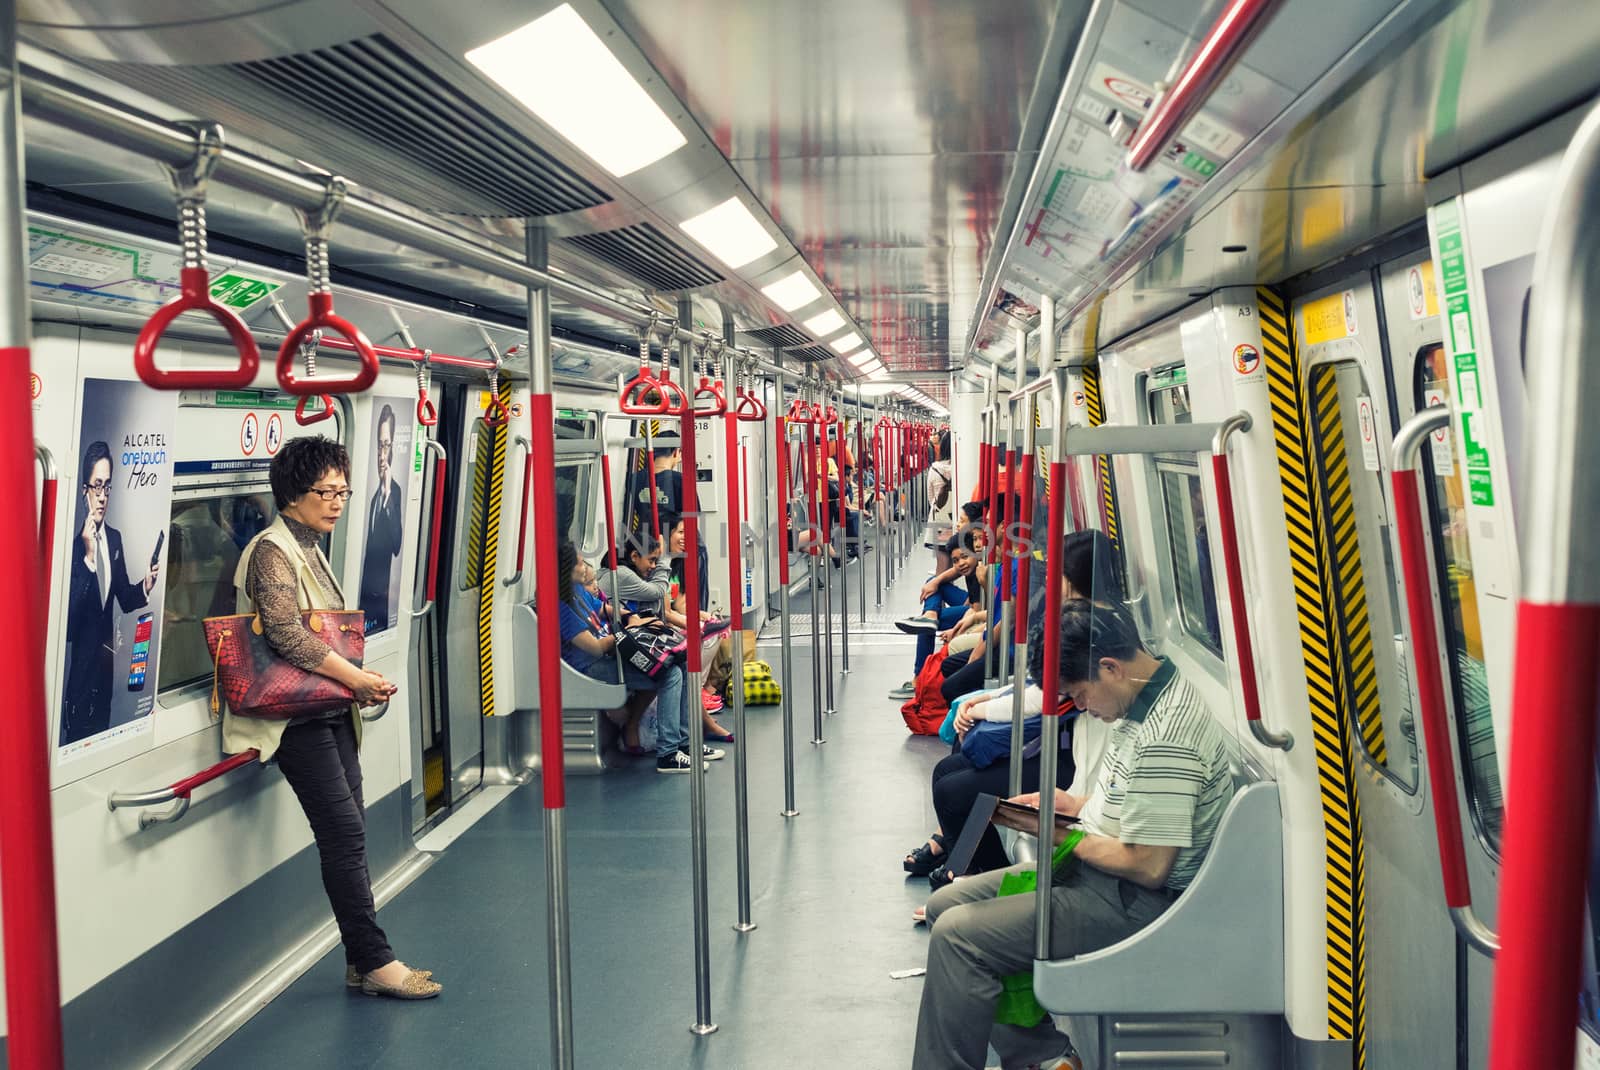 HONG KONG - APRIL 22, 2014: Riders on the MTR in Hong Kong, China. In 2012 the MTR reportedly had 46.4% of the public transport market, making it the most popular transport in Hong Kong